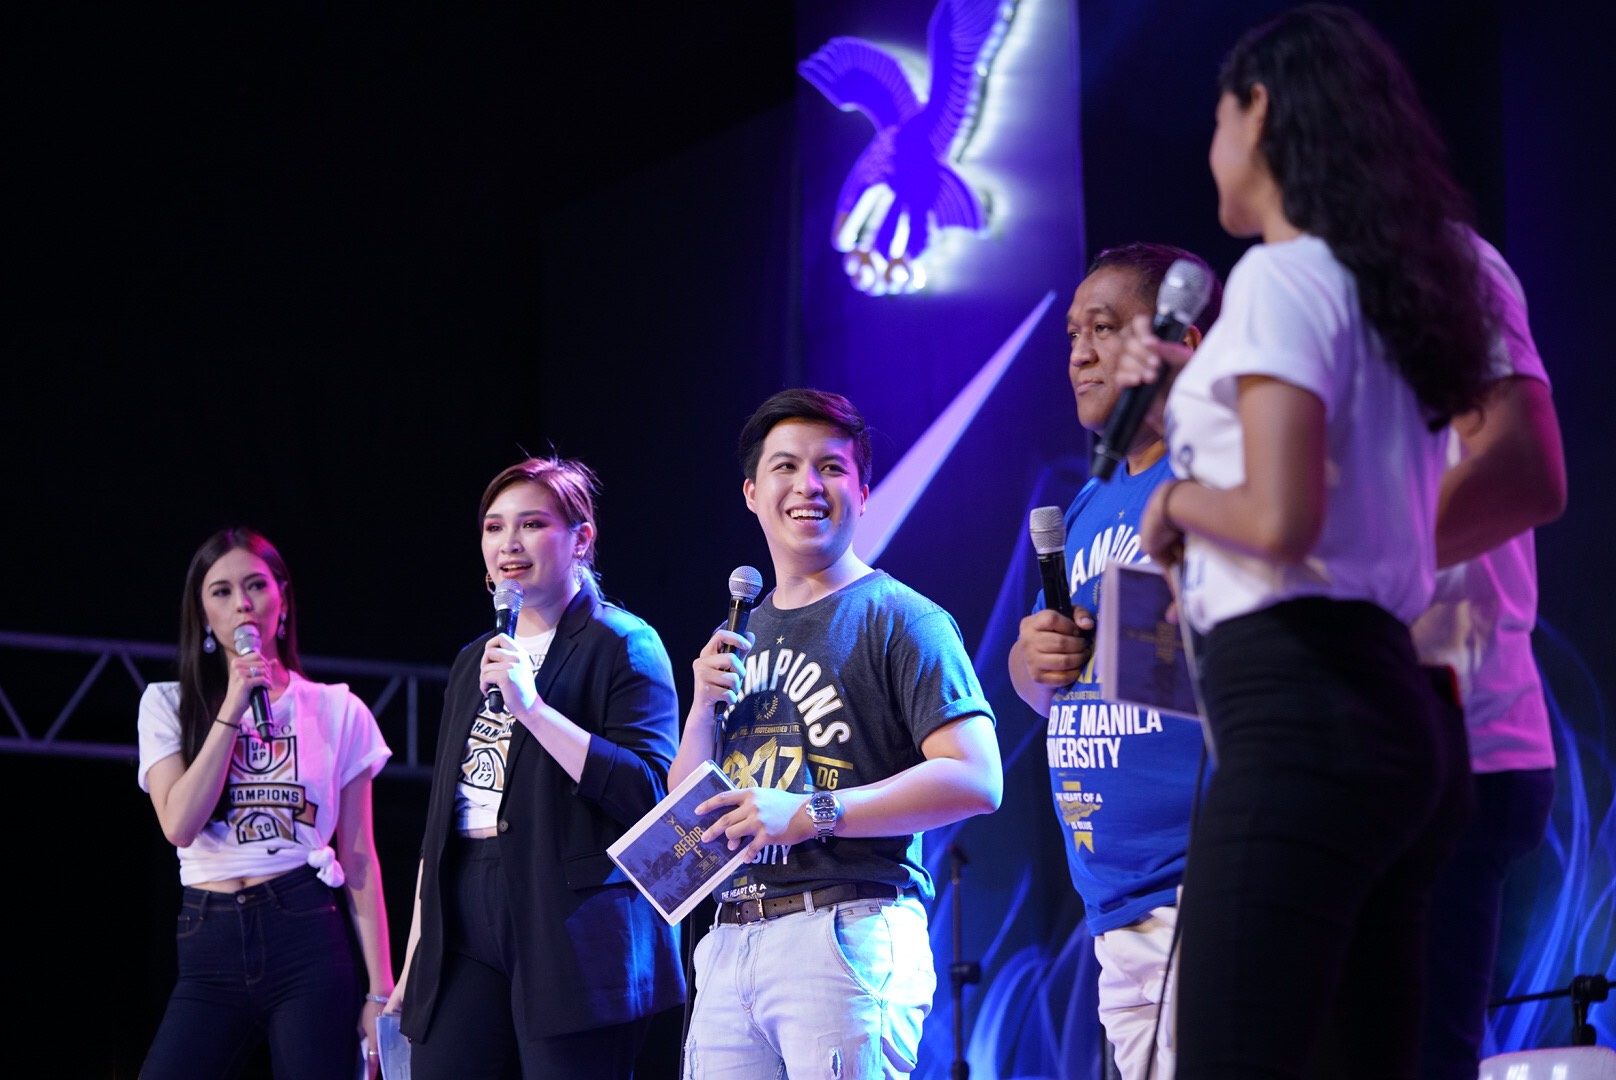 GREETINGS. (Left to right) The hosts Laura Lehmann, Bettina Jose, Jhofer Eleria, Mhel Garrido and UAAP Season 80 courtside reporter Martie Bautista open up the floor. Photo by Martin San Diego/Rappler  